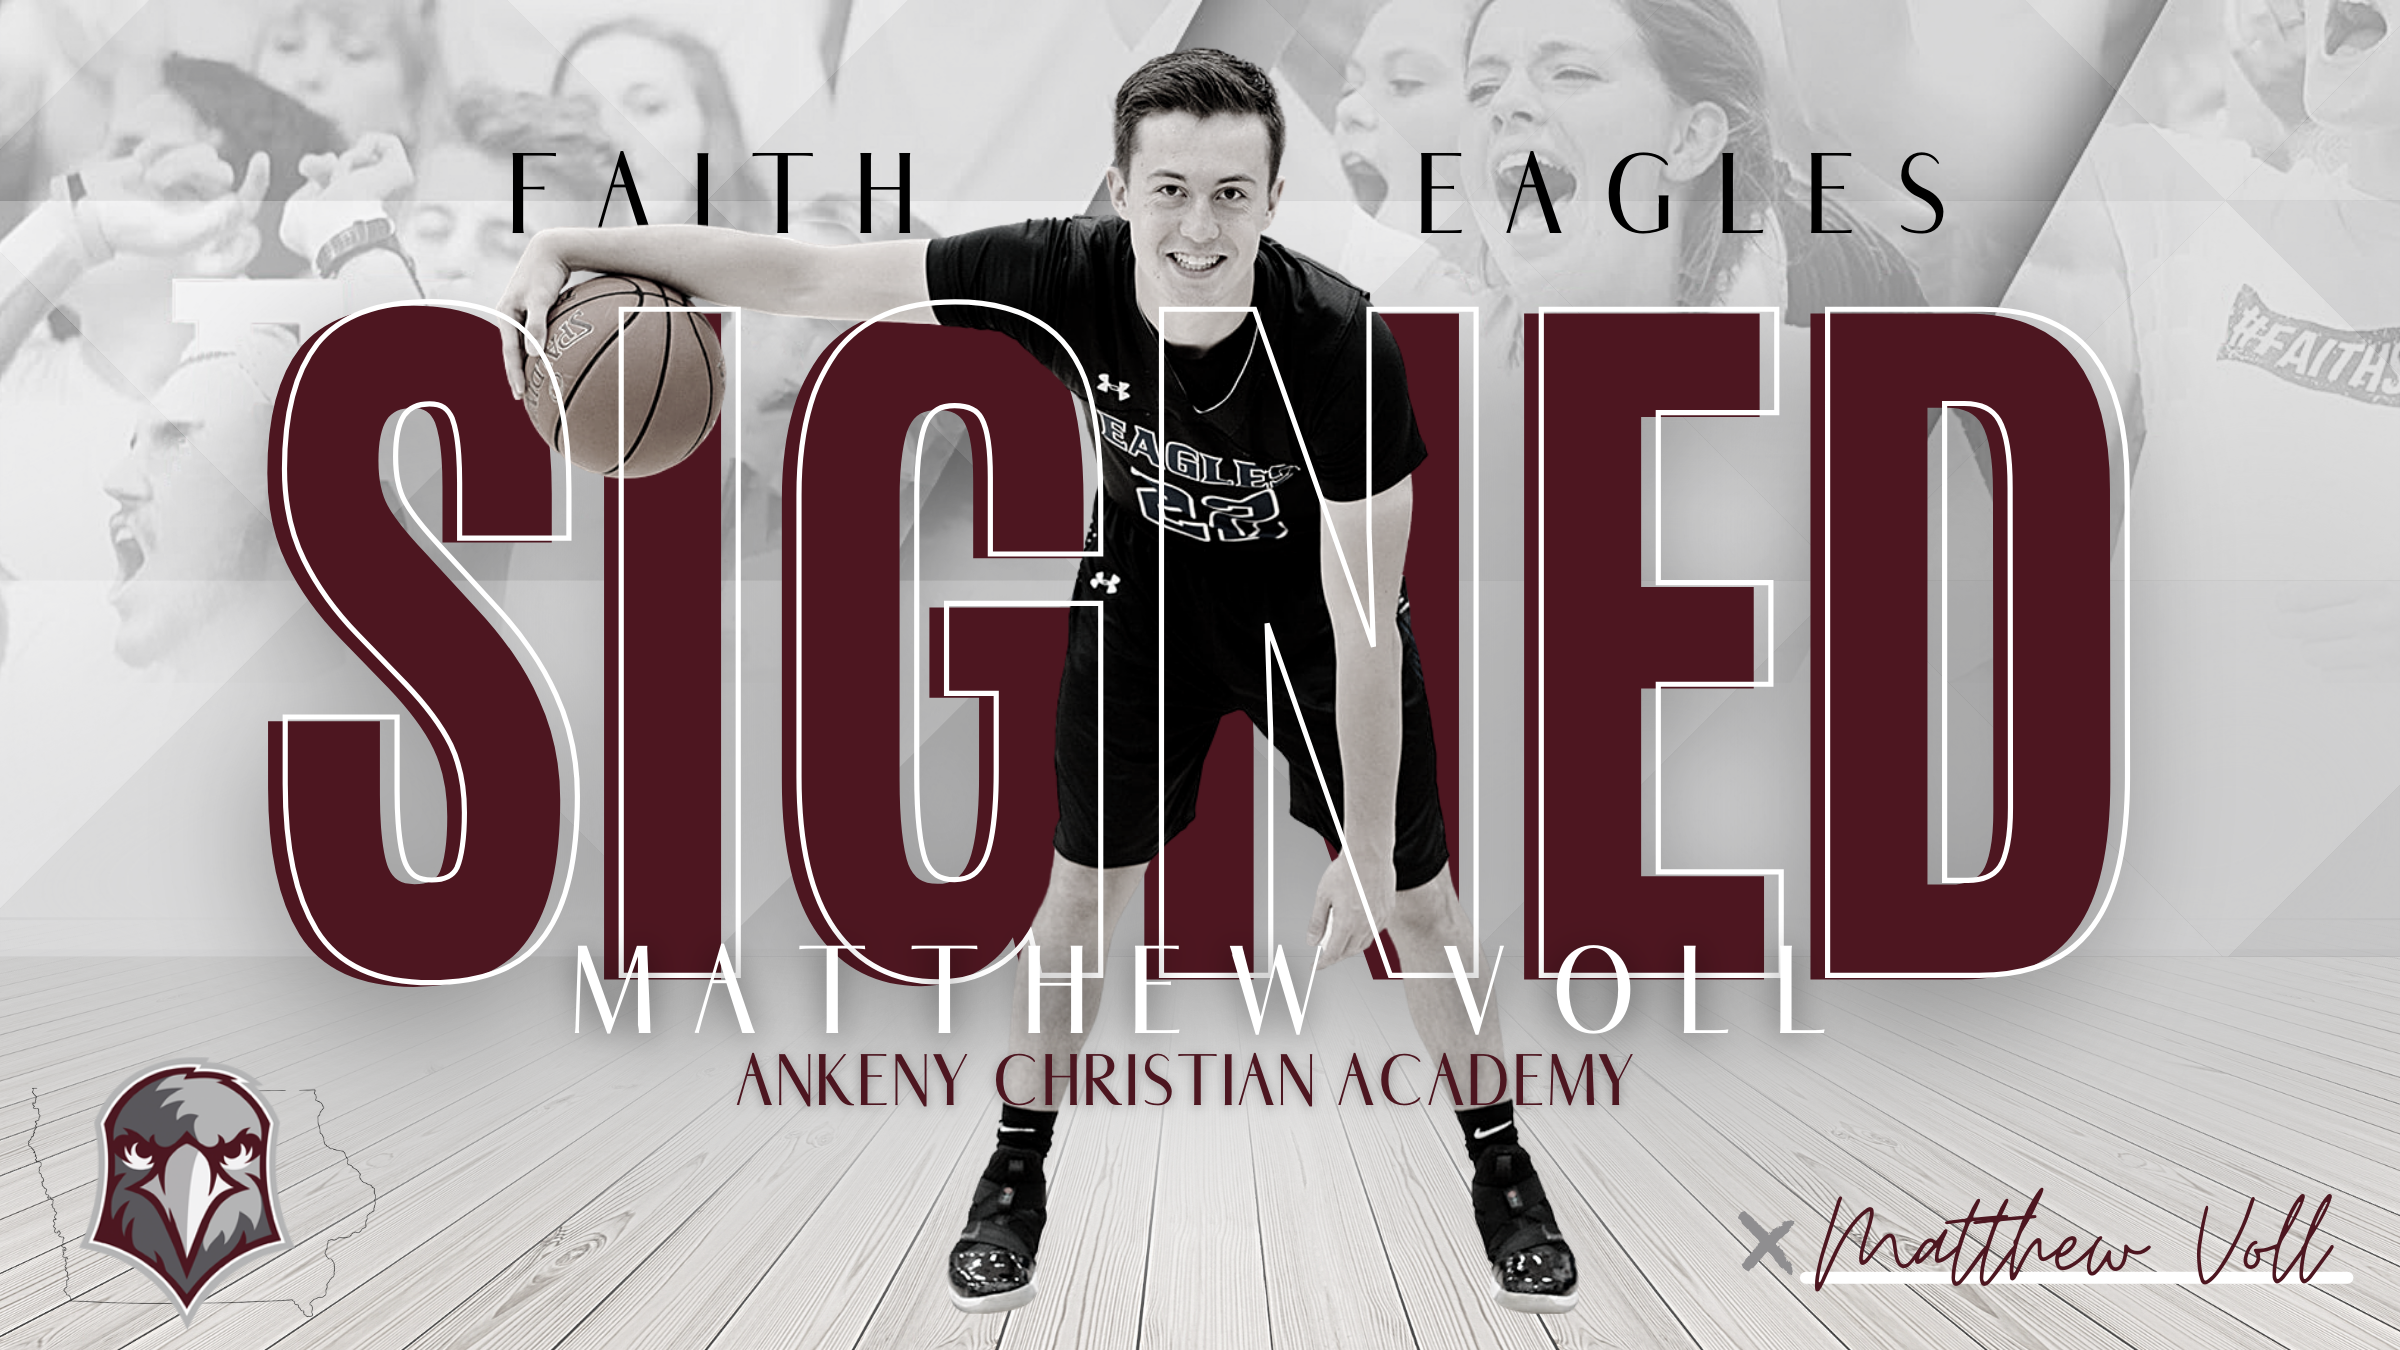 Voll Signs With Eagles